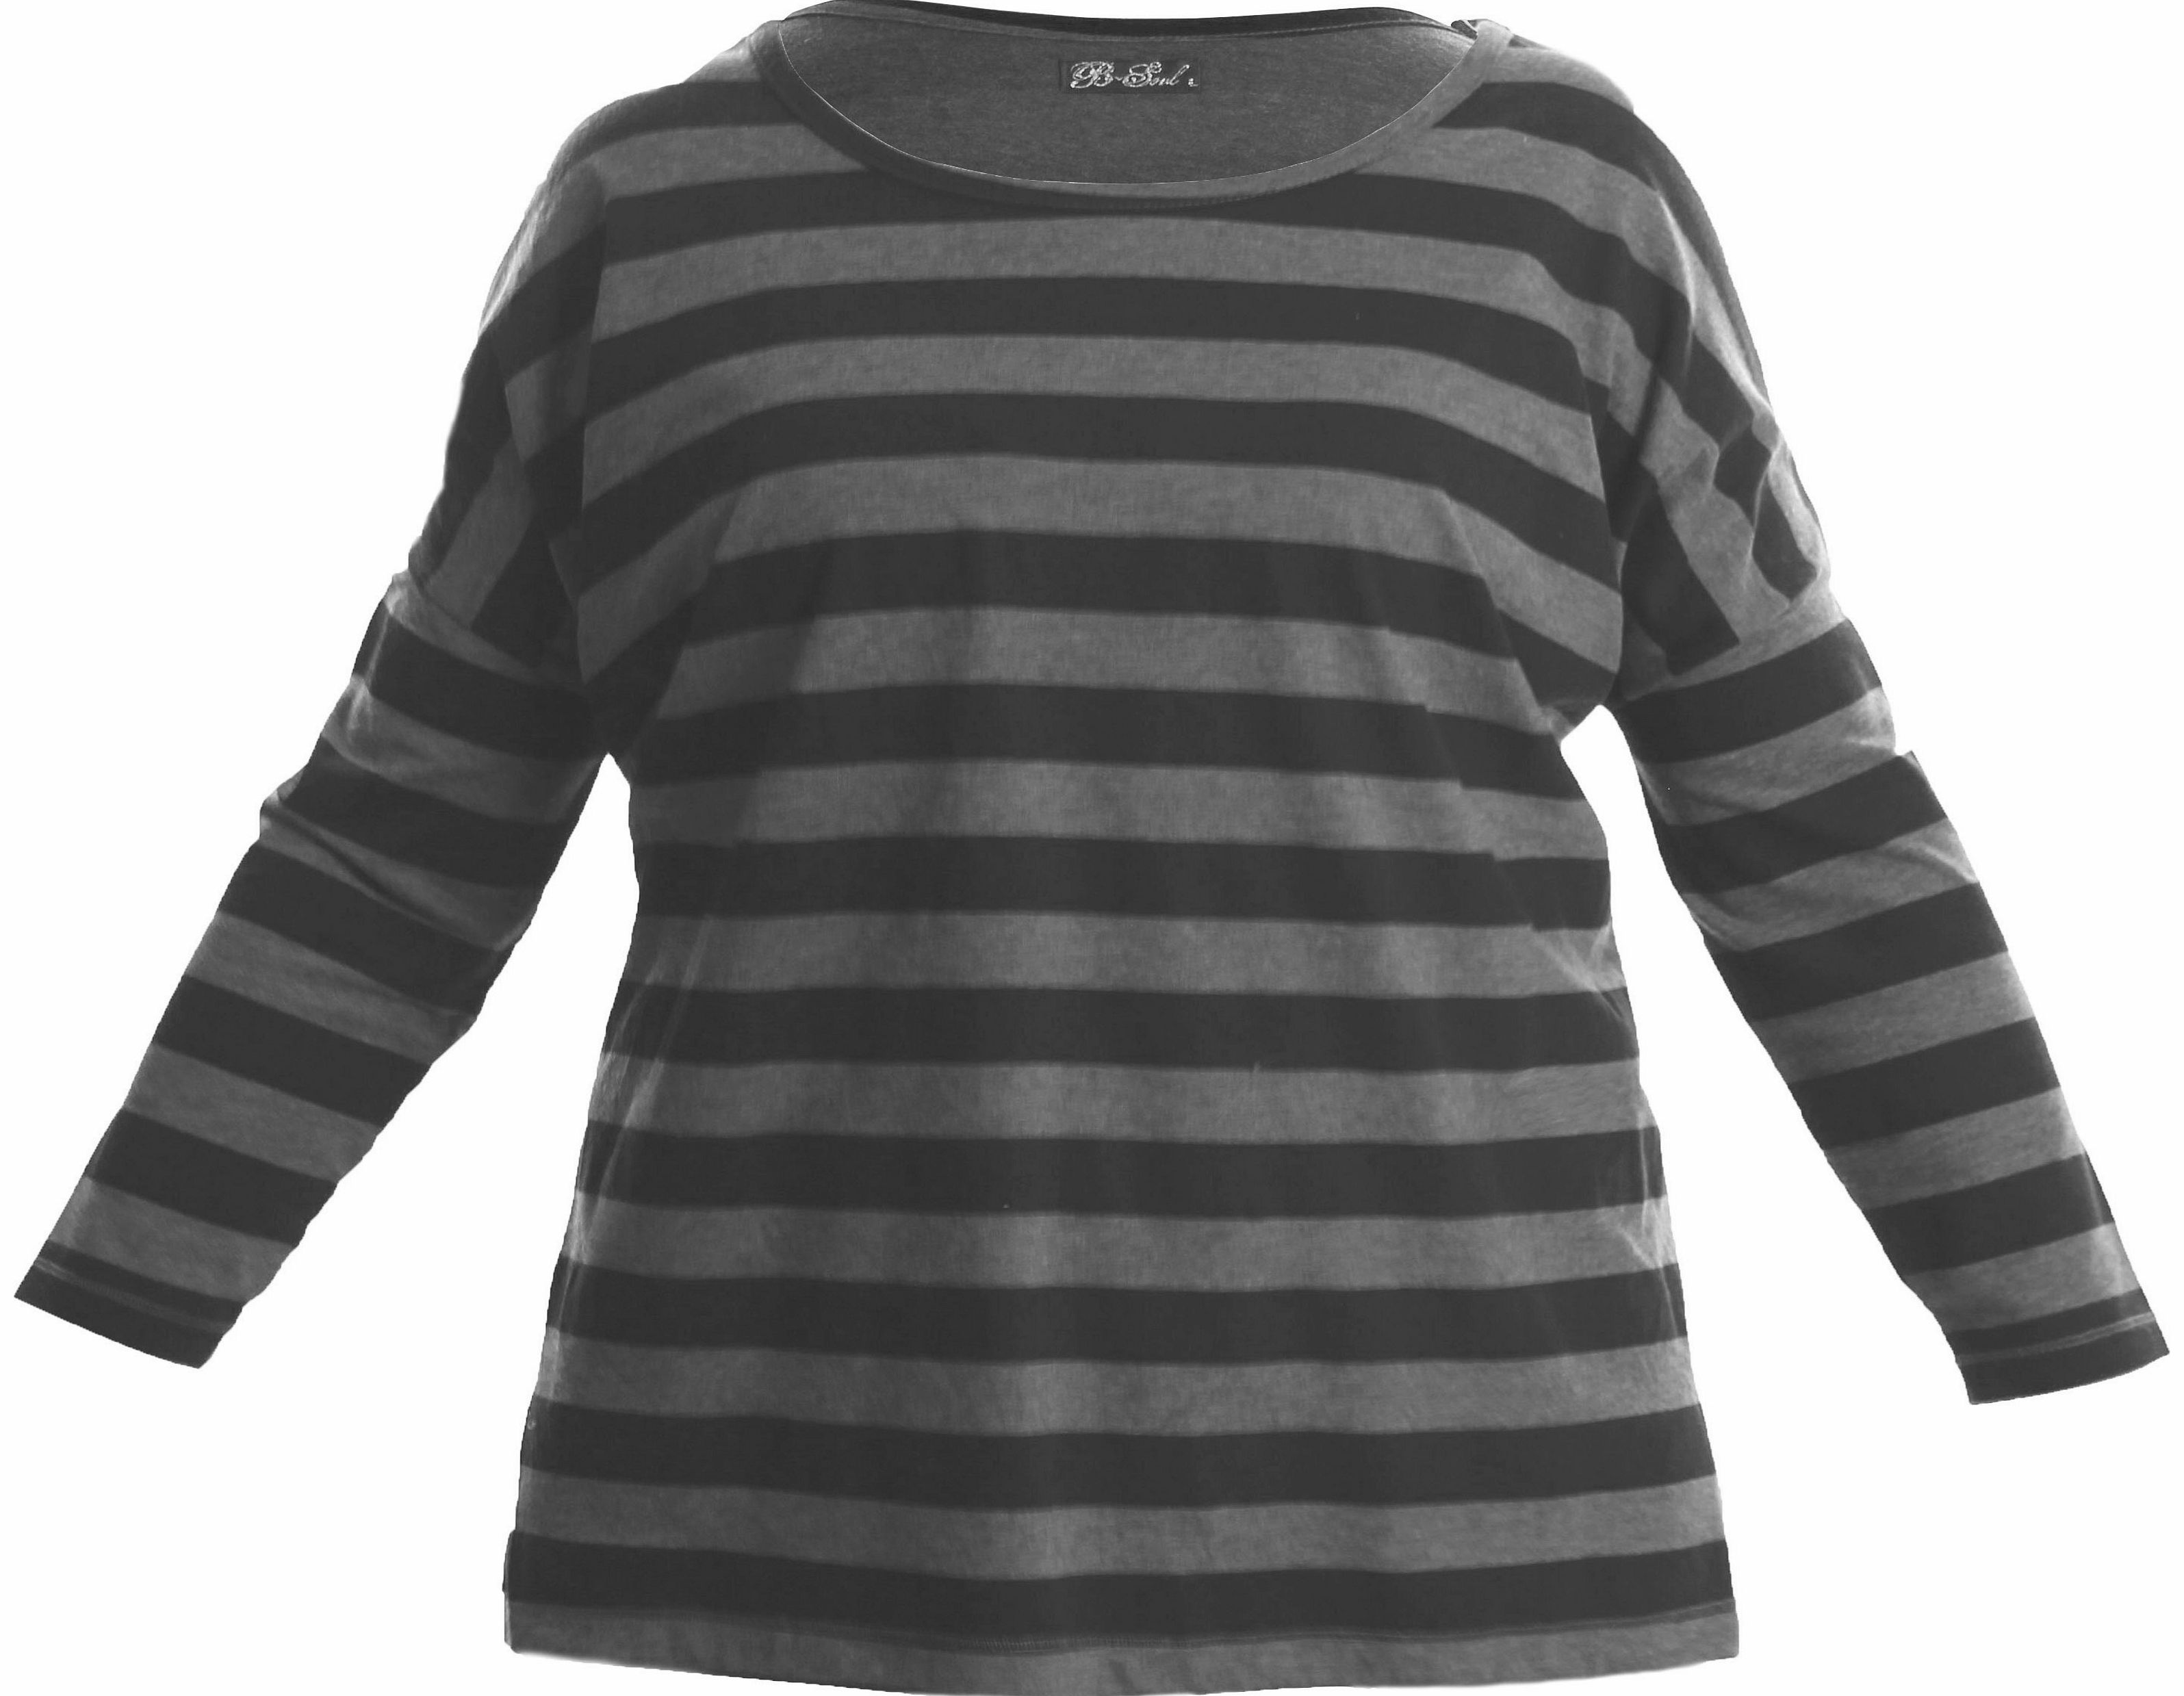 Oversize Striped Long Sleeved Top